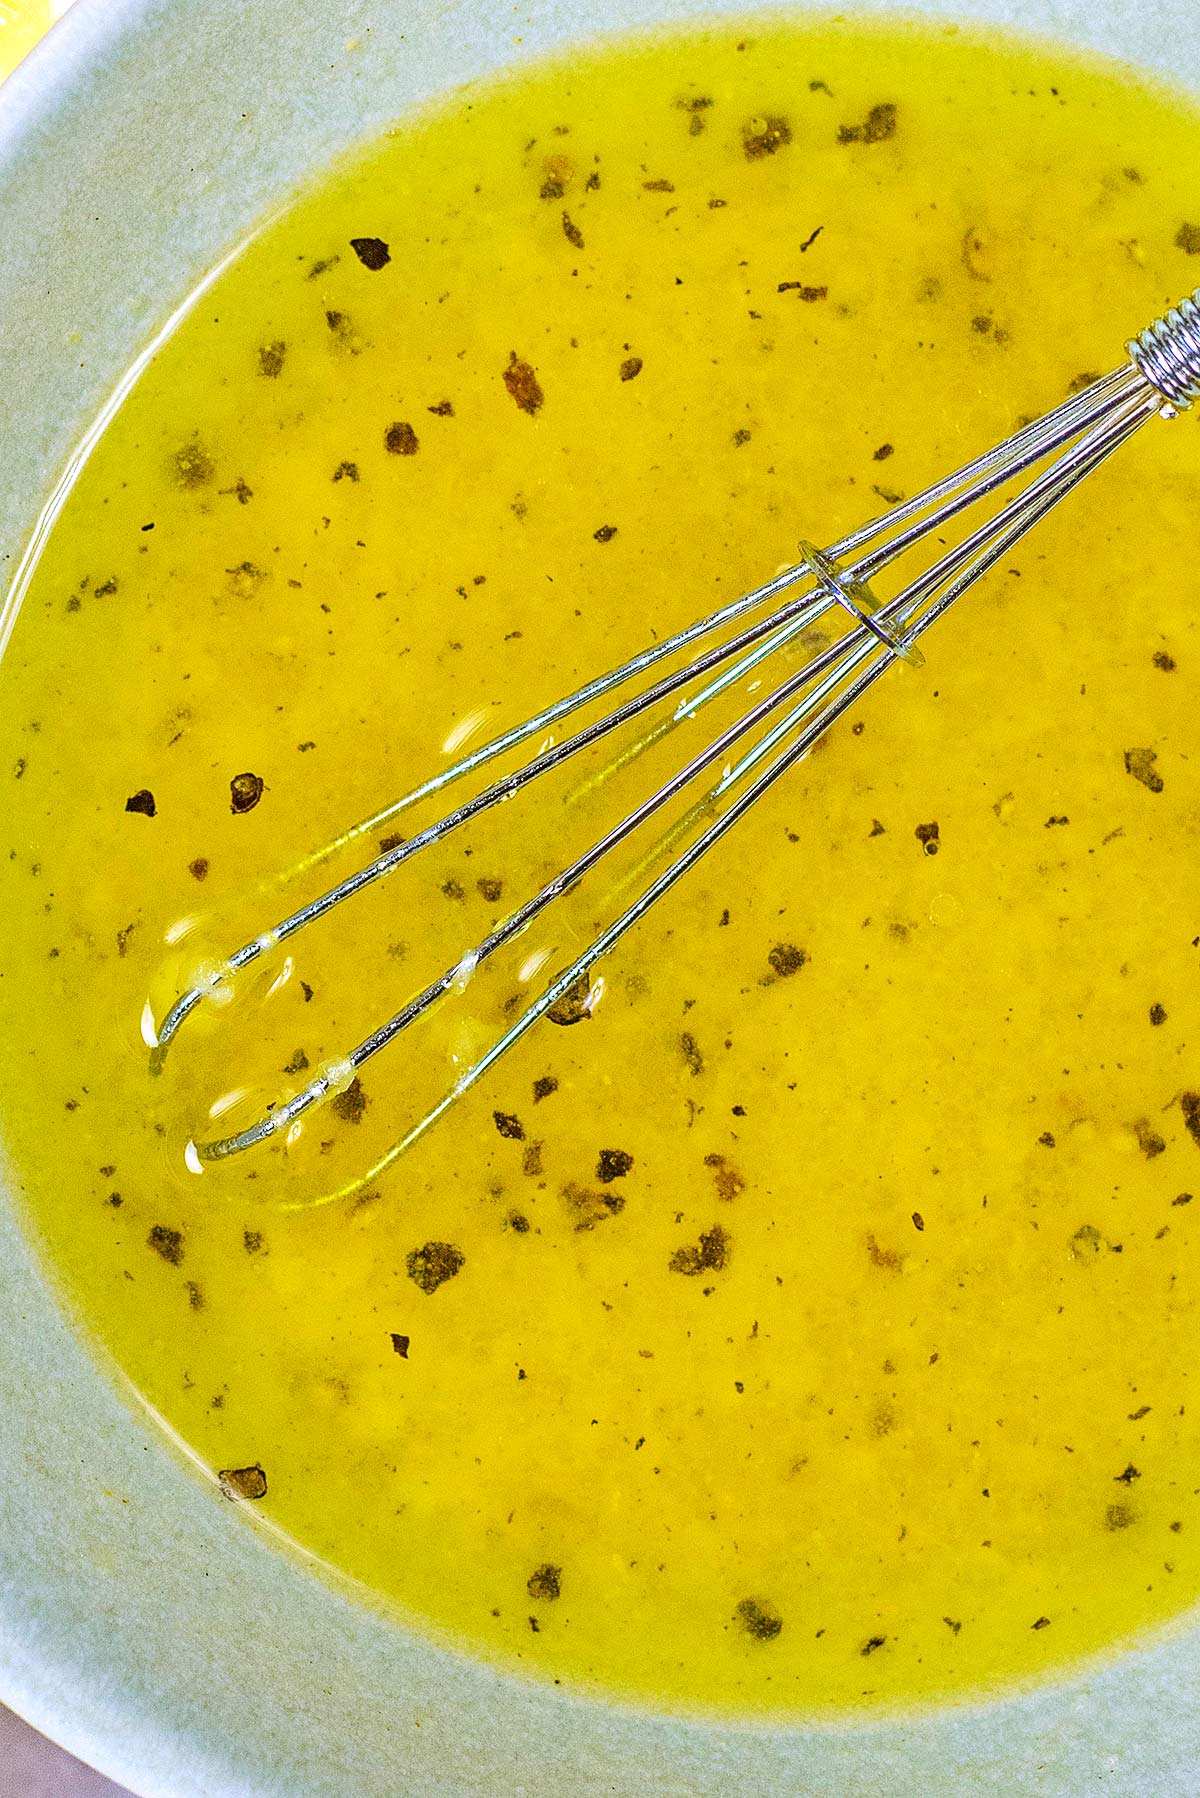 A small whisk in a bowl of salad dressing.